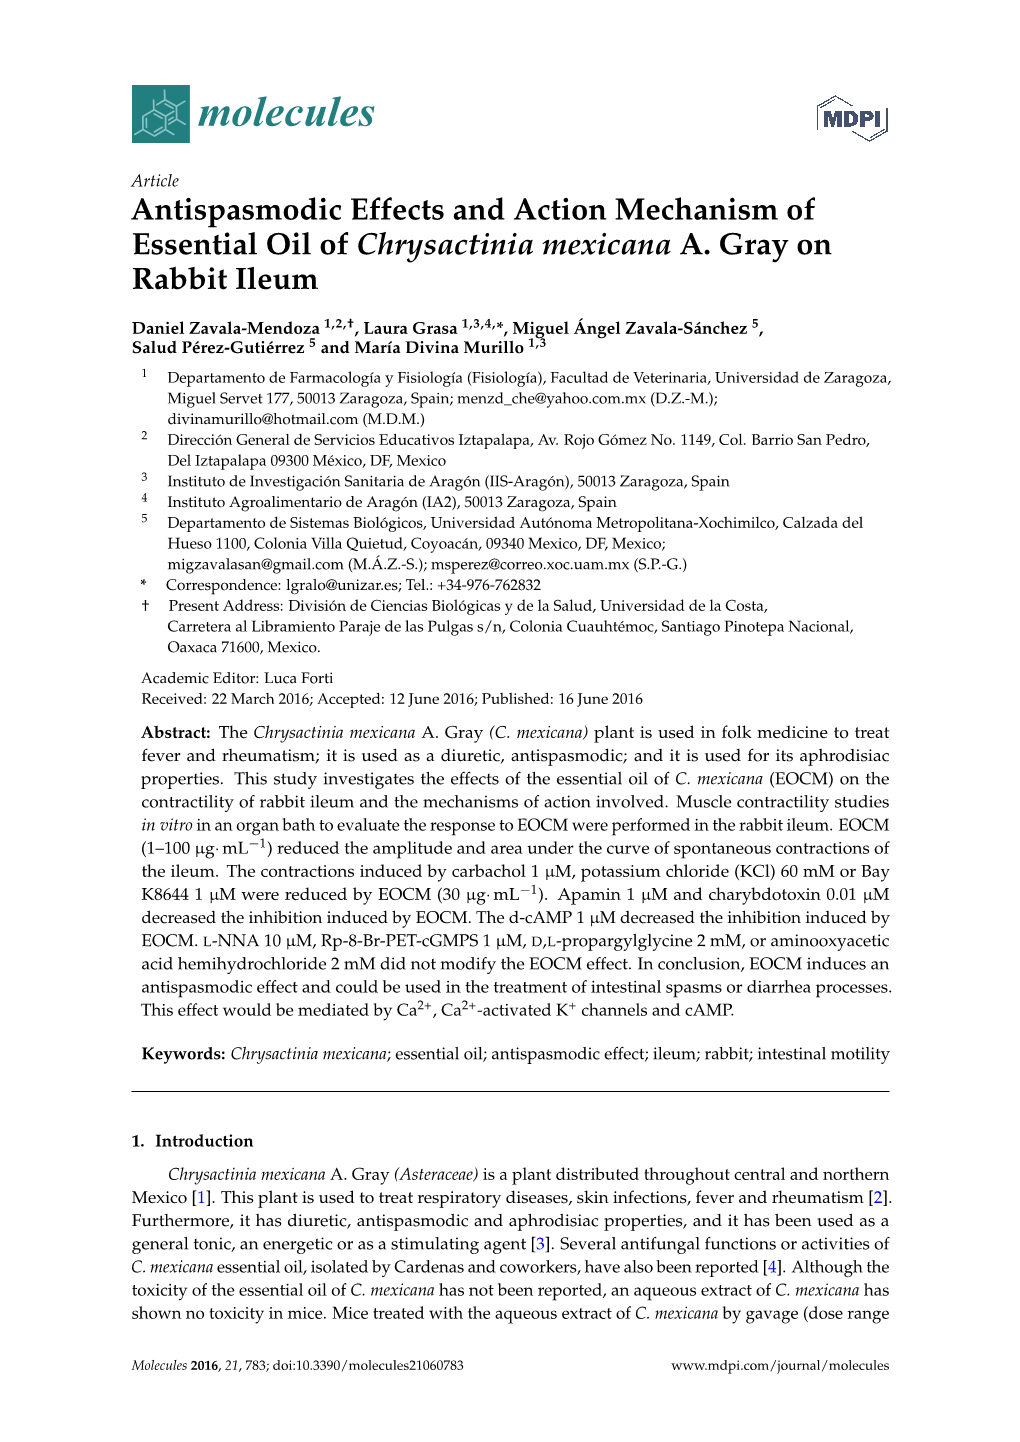 Antispasmodic Effects and Action Mechanism of Essential Oil of Chrysactinia Mexicana A